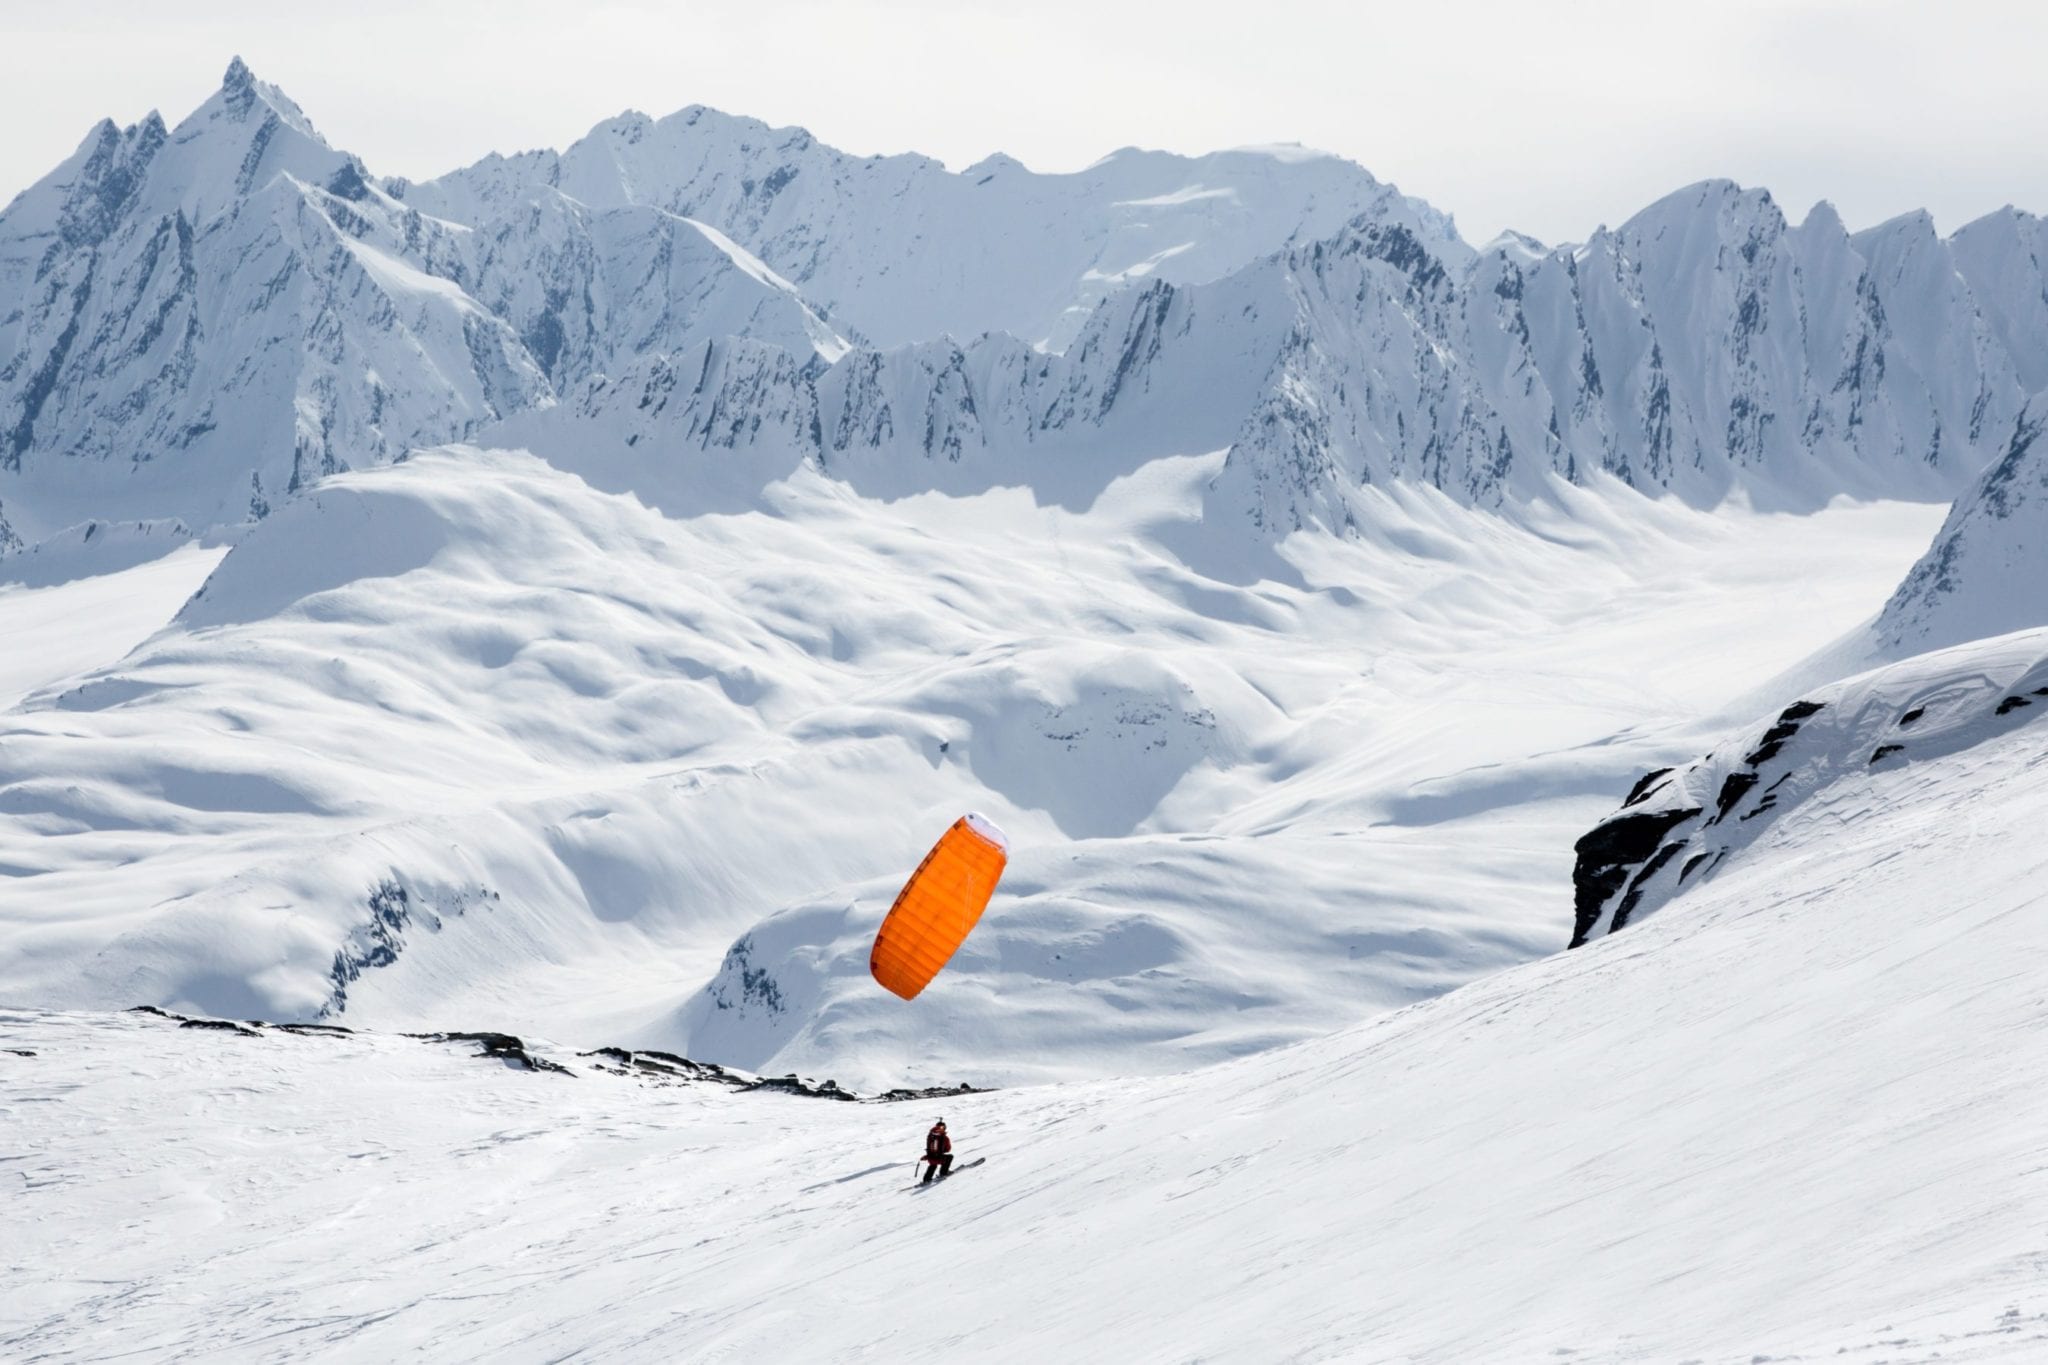 Pascal kiting up a ridge on the Loveland Glacier in preparation of speedflying down.